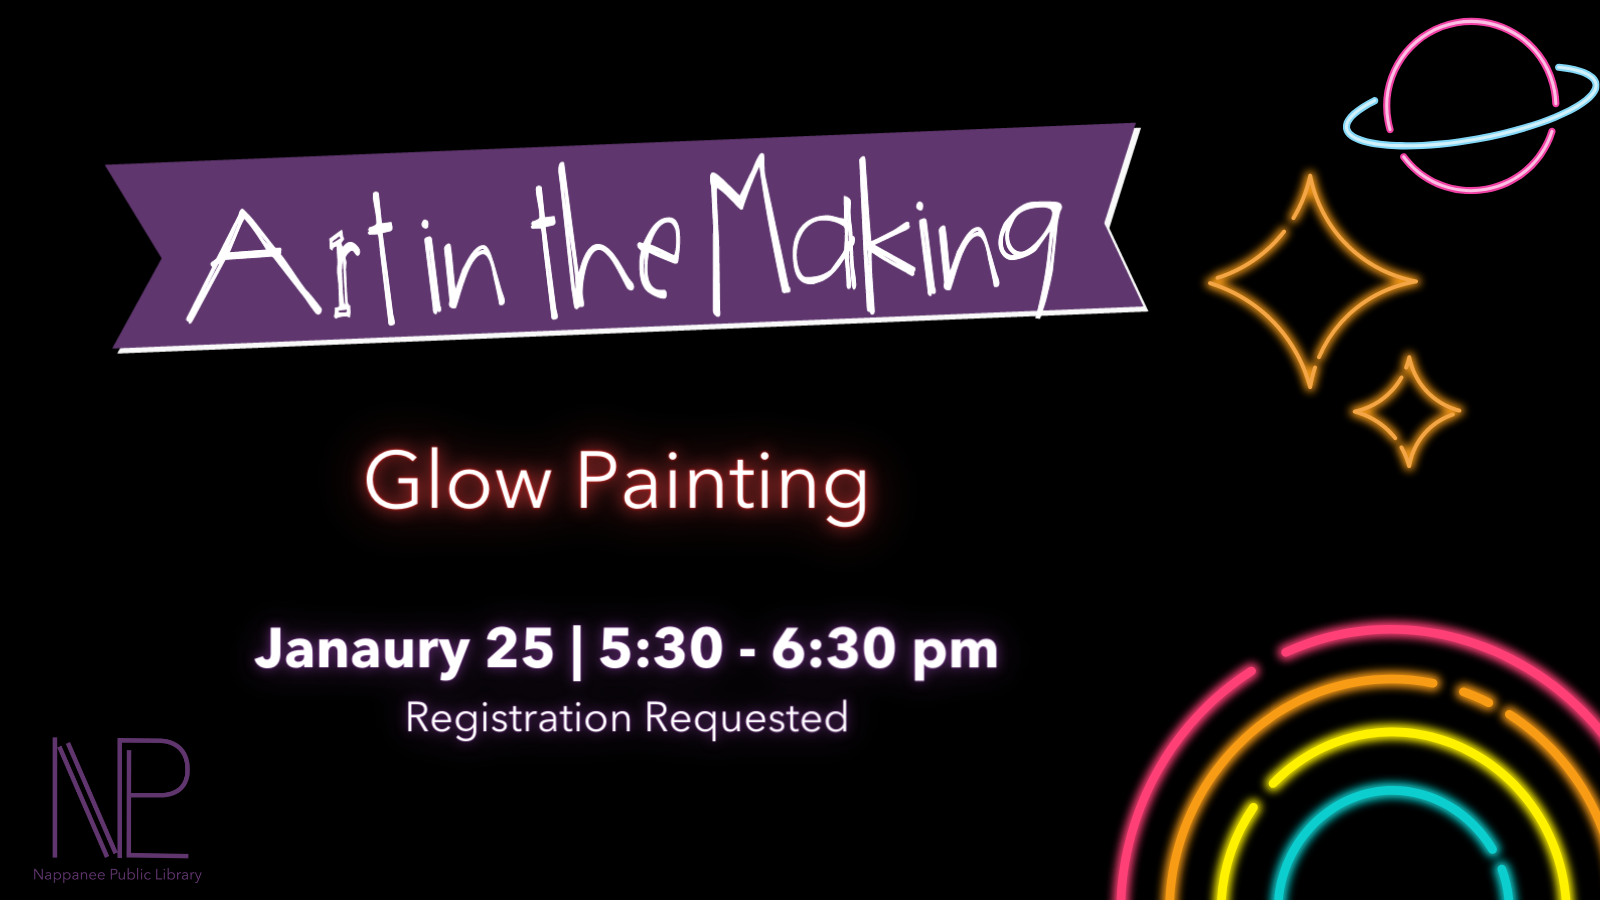 Art in the Making January Glow Painting Graphic